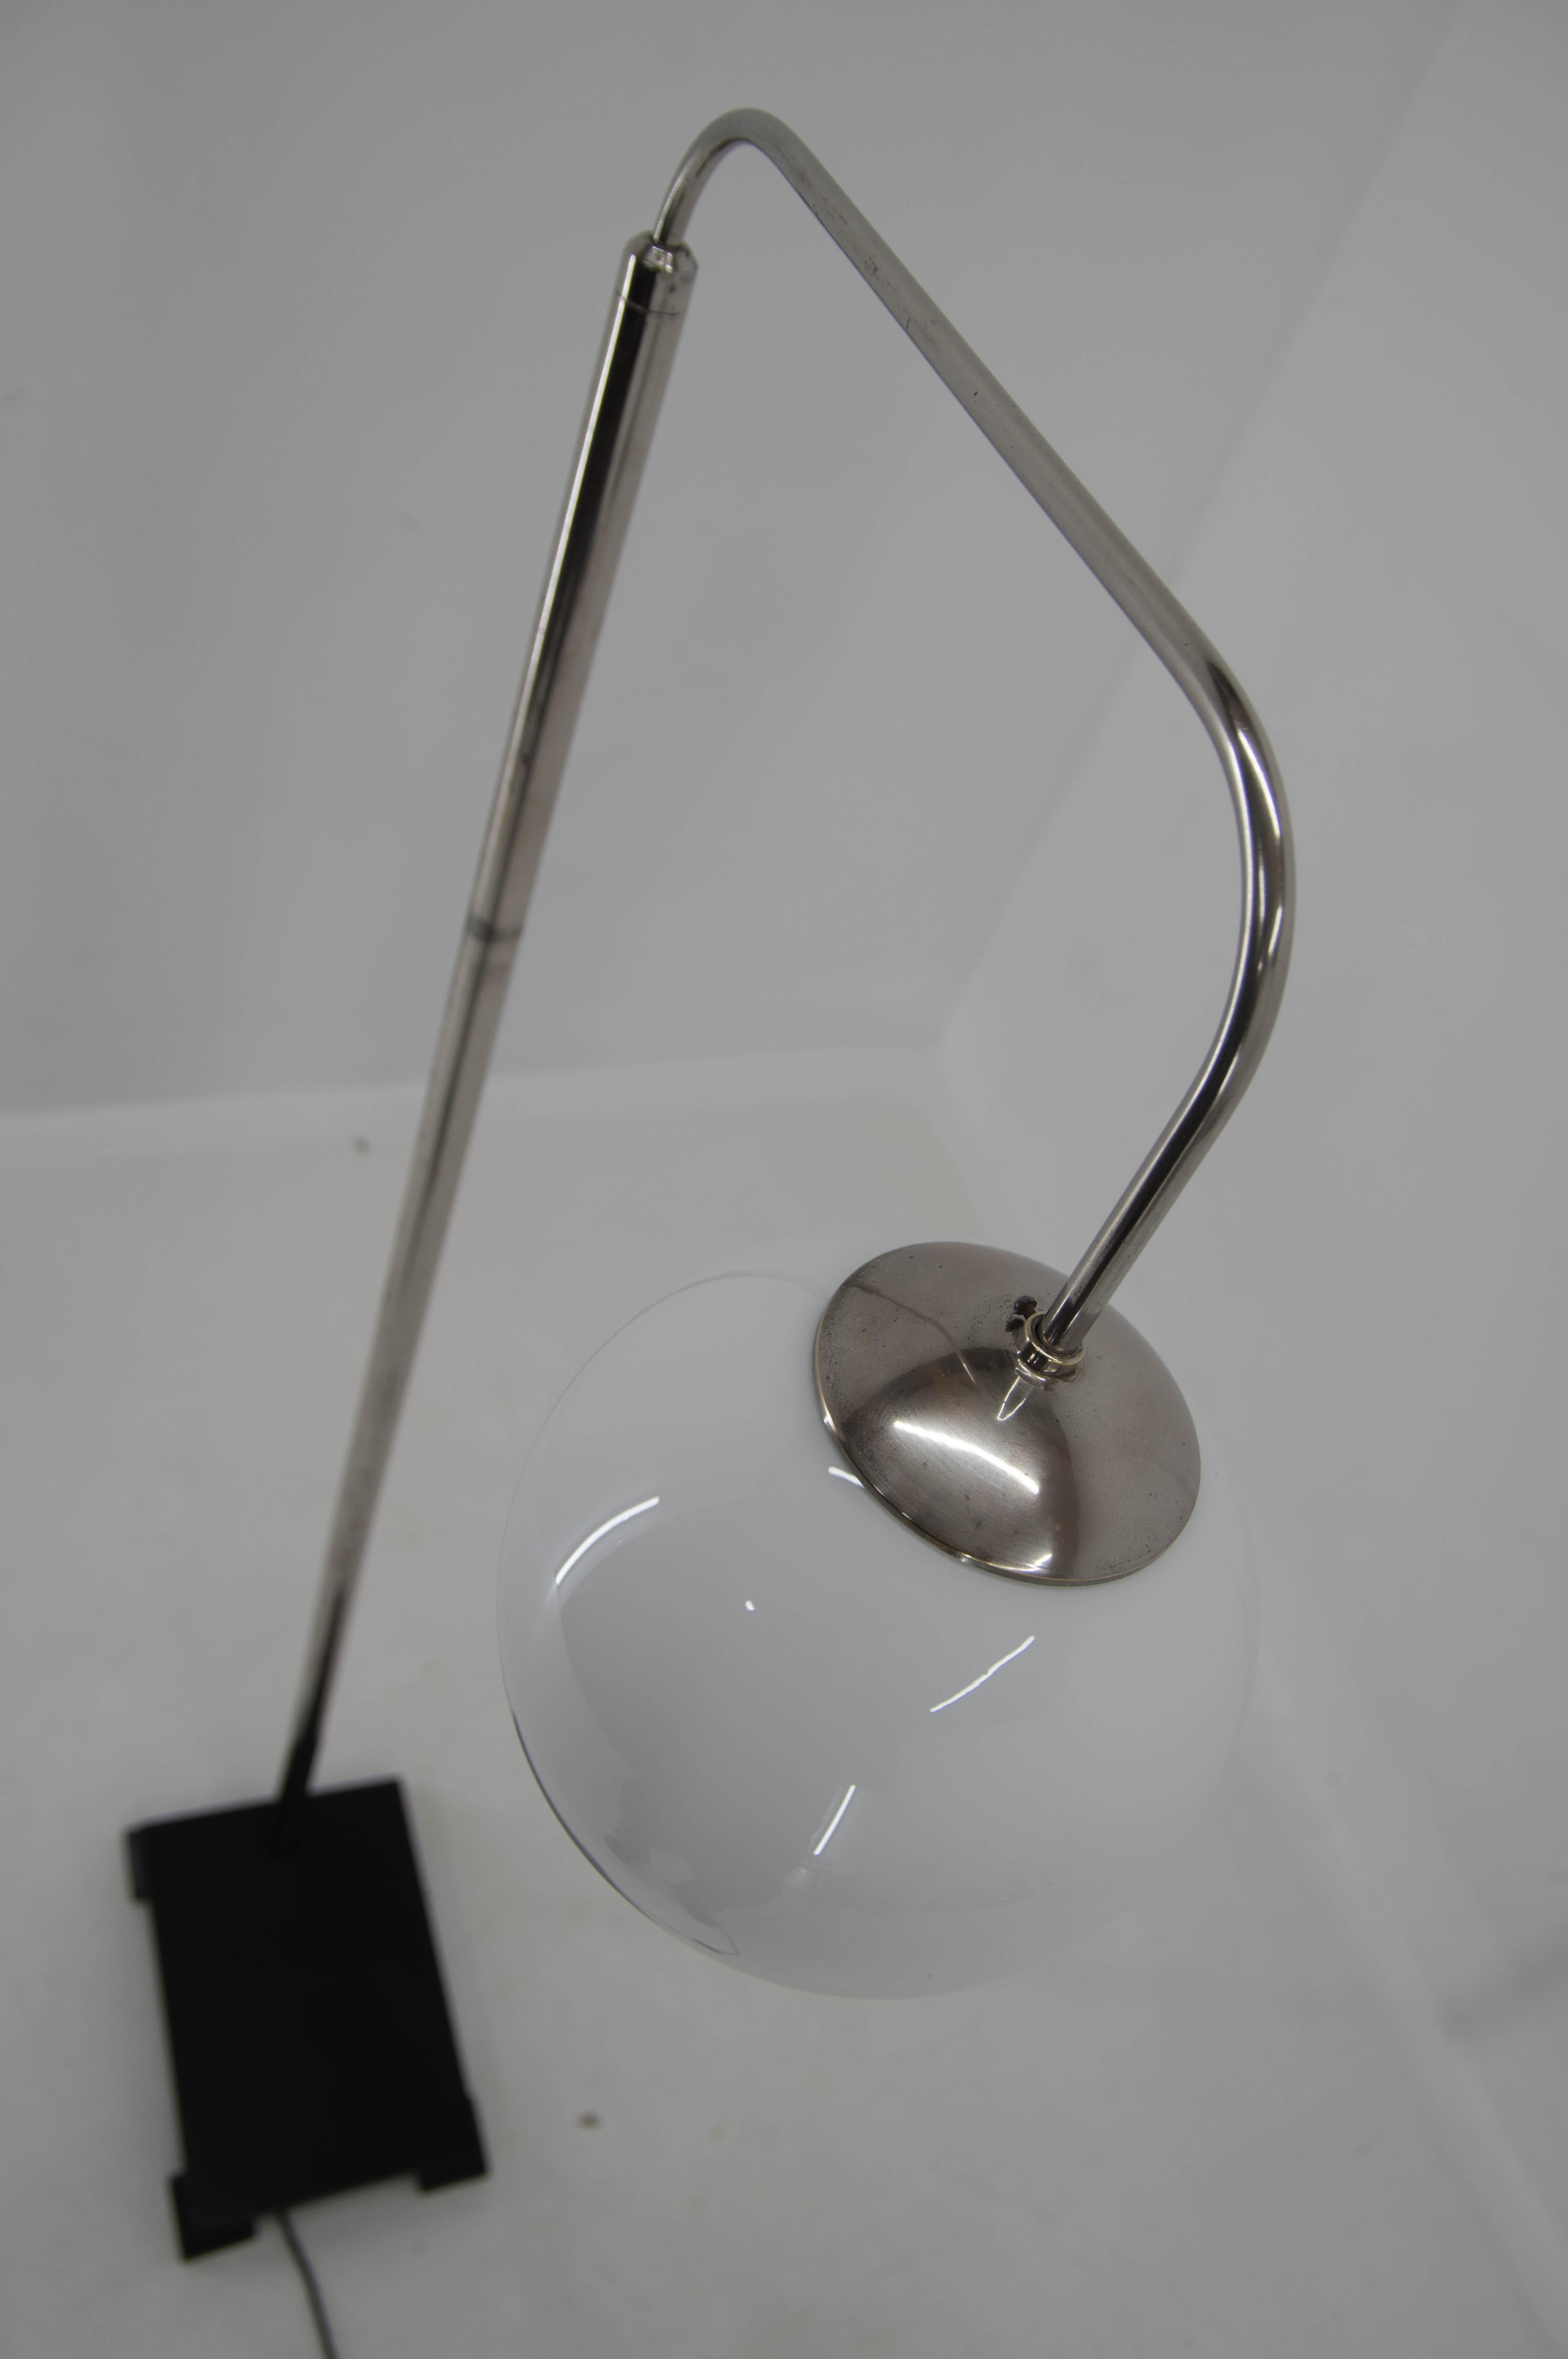 Czech Functionalist Floor Lamp with Adjustable Height, 1930s For Sale